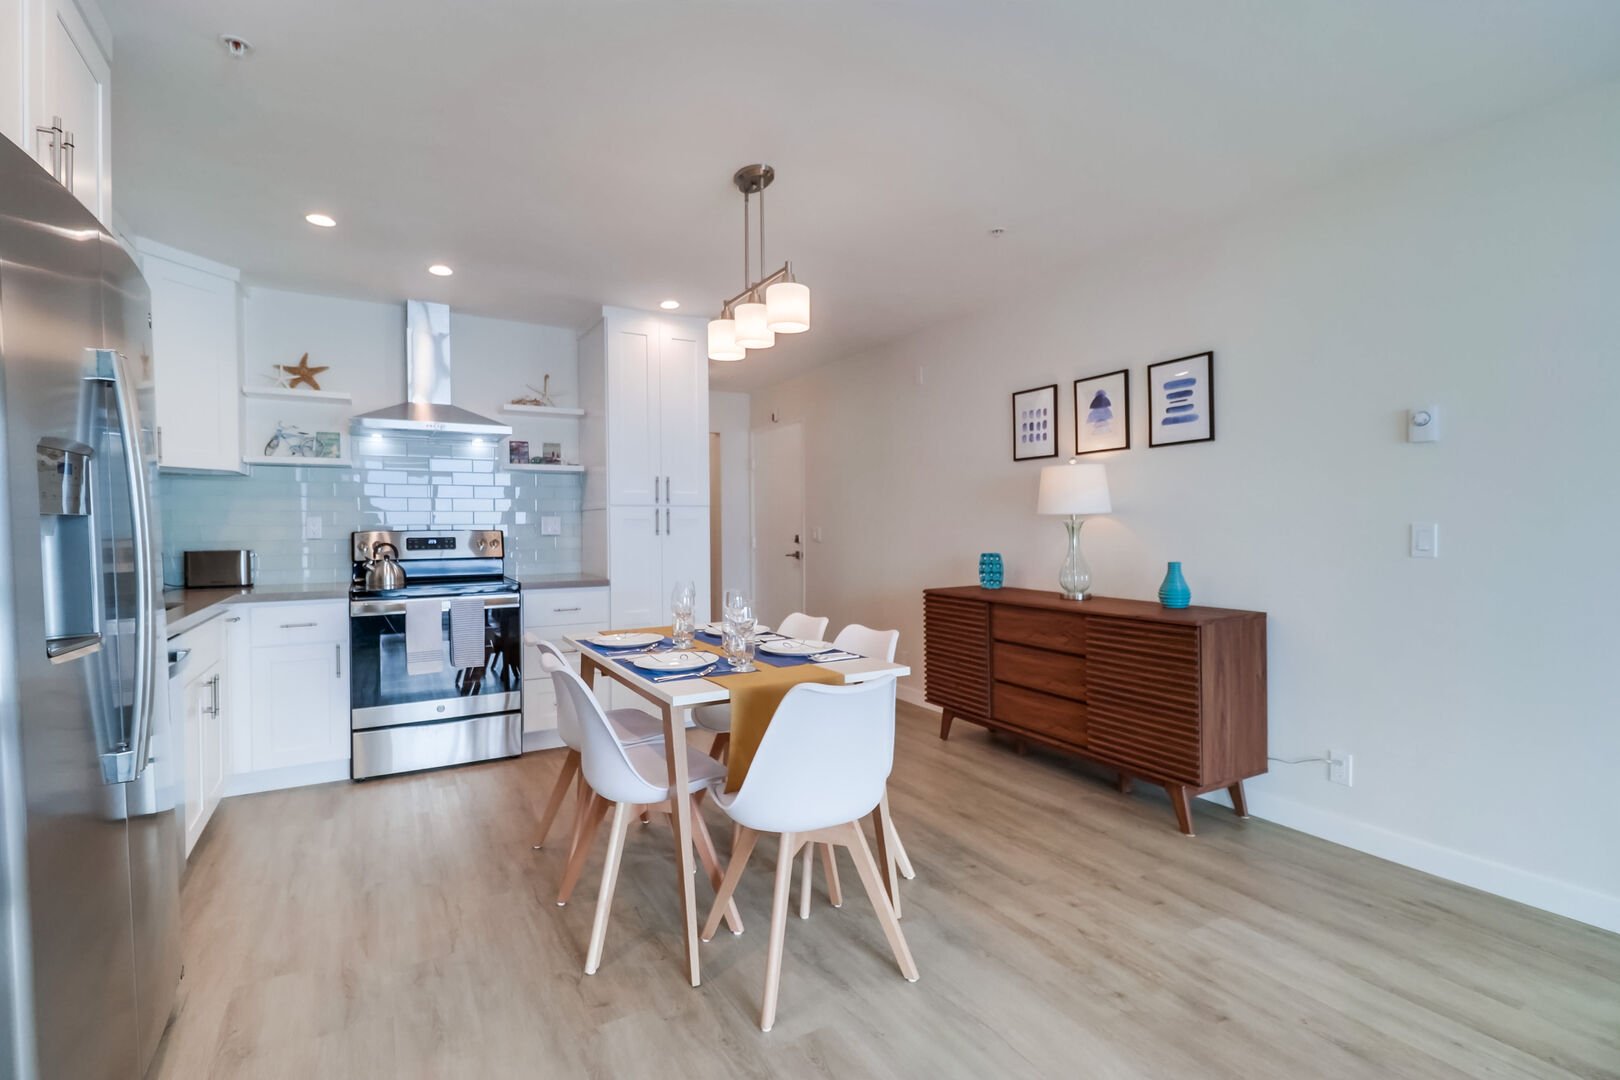 Open-style kitchen with modern, minimalist decor, stainless steel appliances and dining for 5 guests